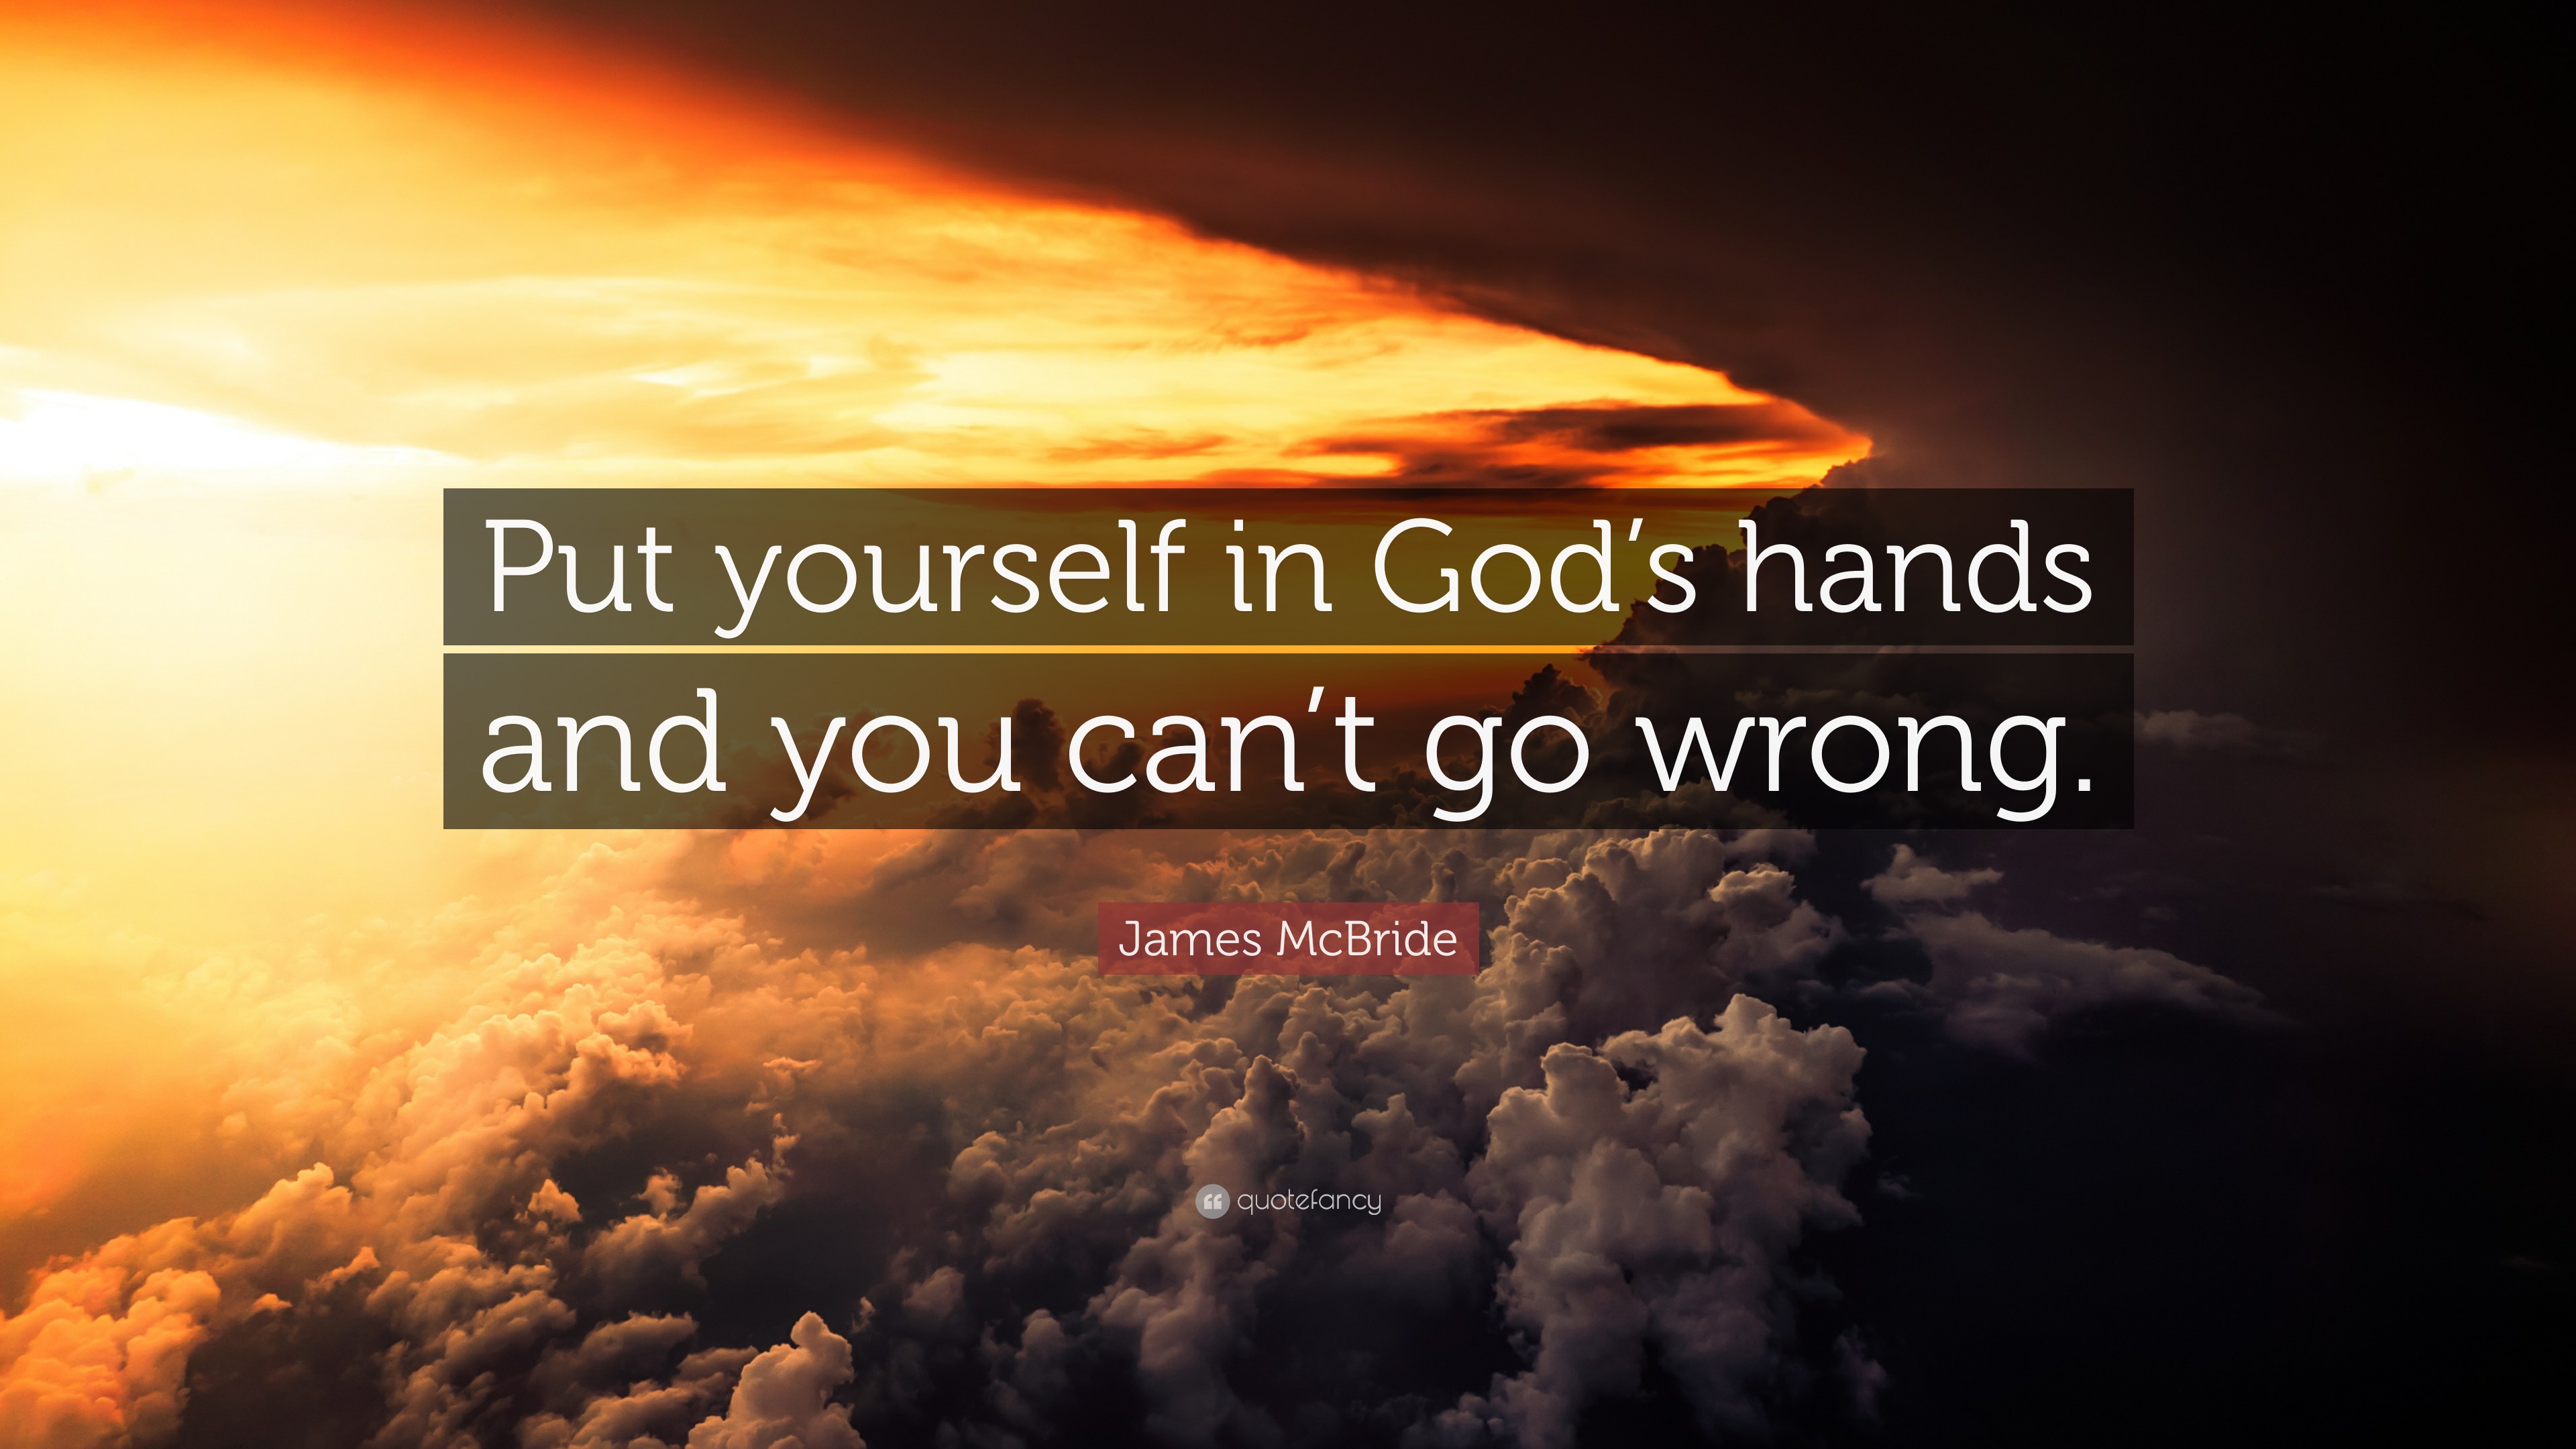 James McBride Quote: “Put yourself in God's hands and you can't go wrong.”